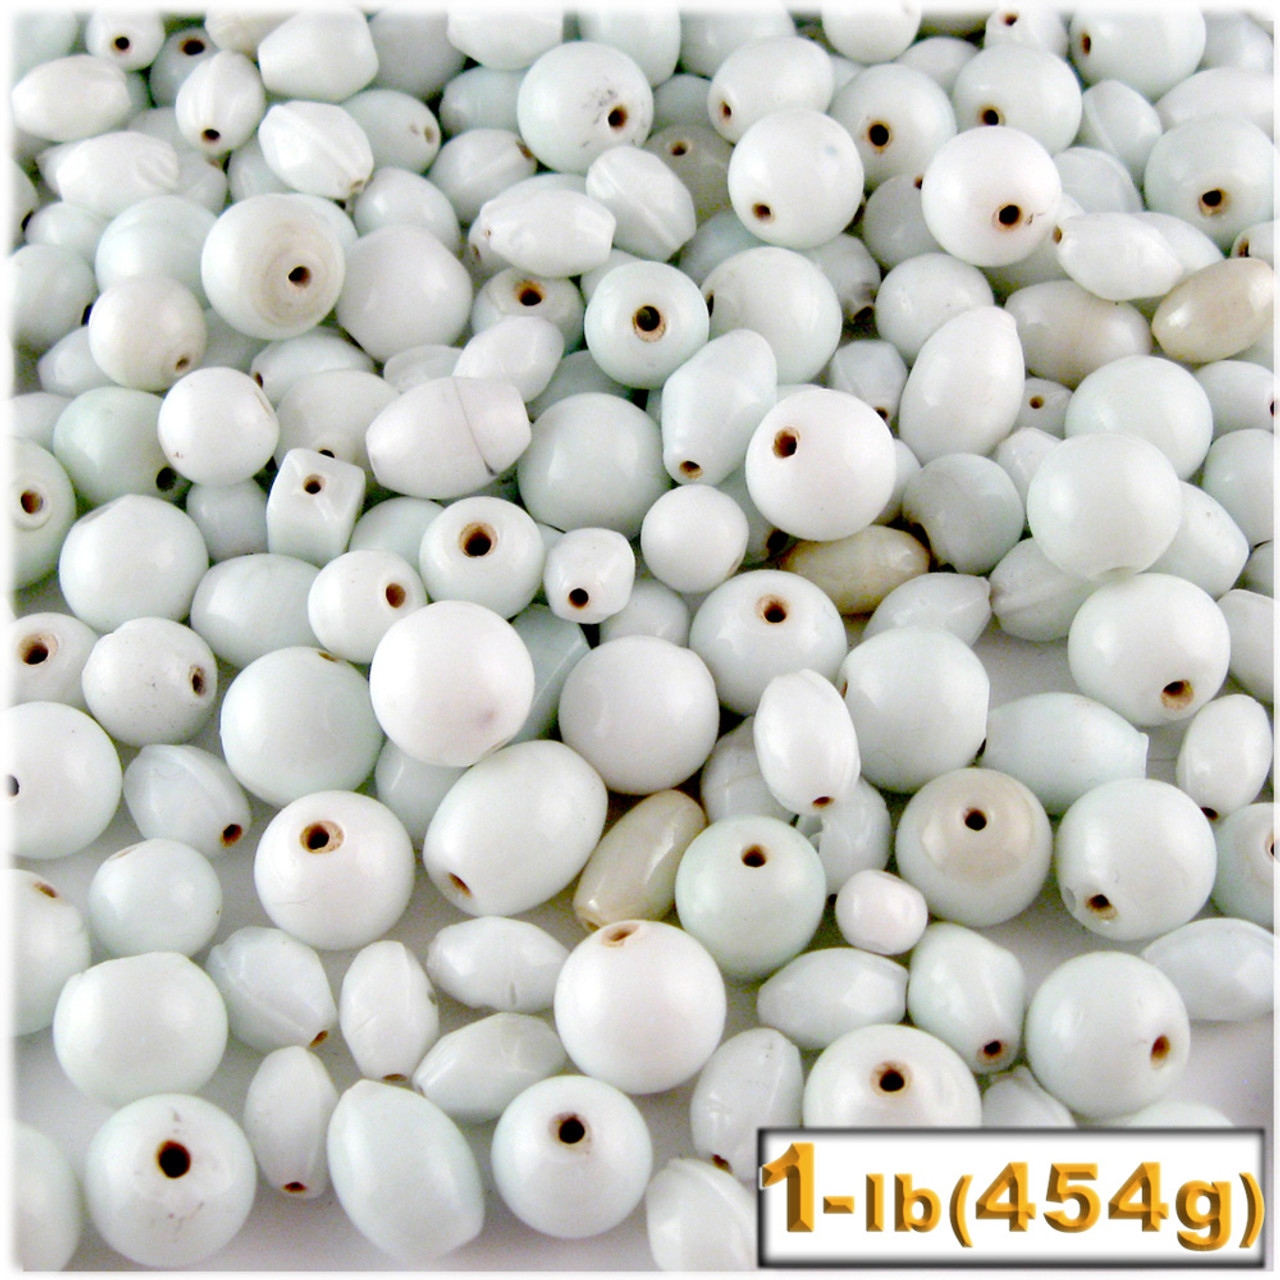 The Crafts Outlet 1lb=454g Bulk Assorted Shapes and Sizes 6-12mm Glass  Beads Mixed